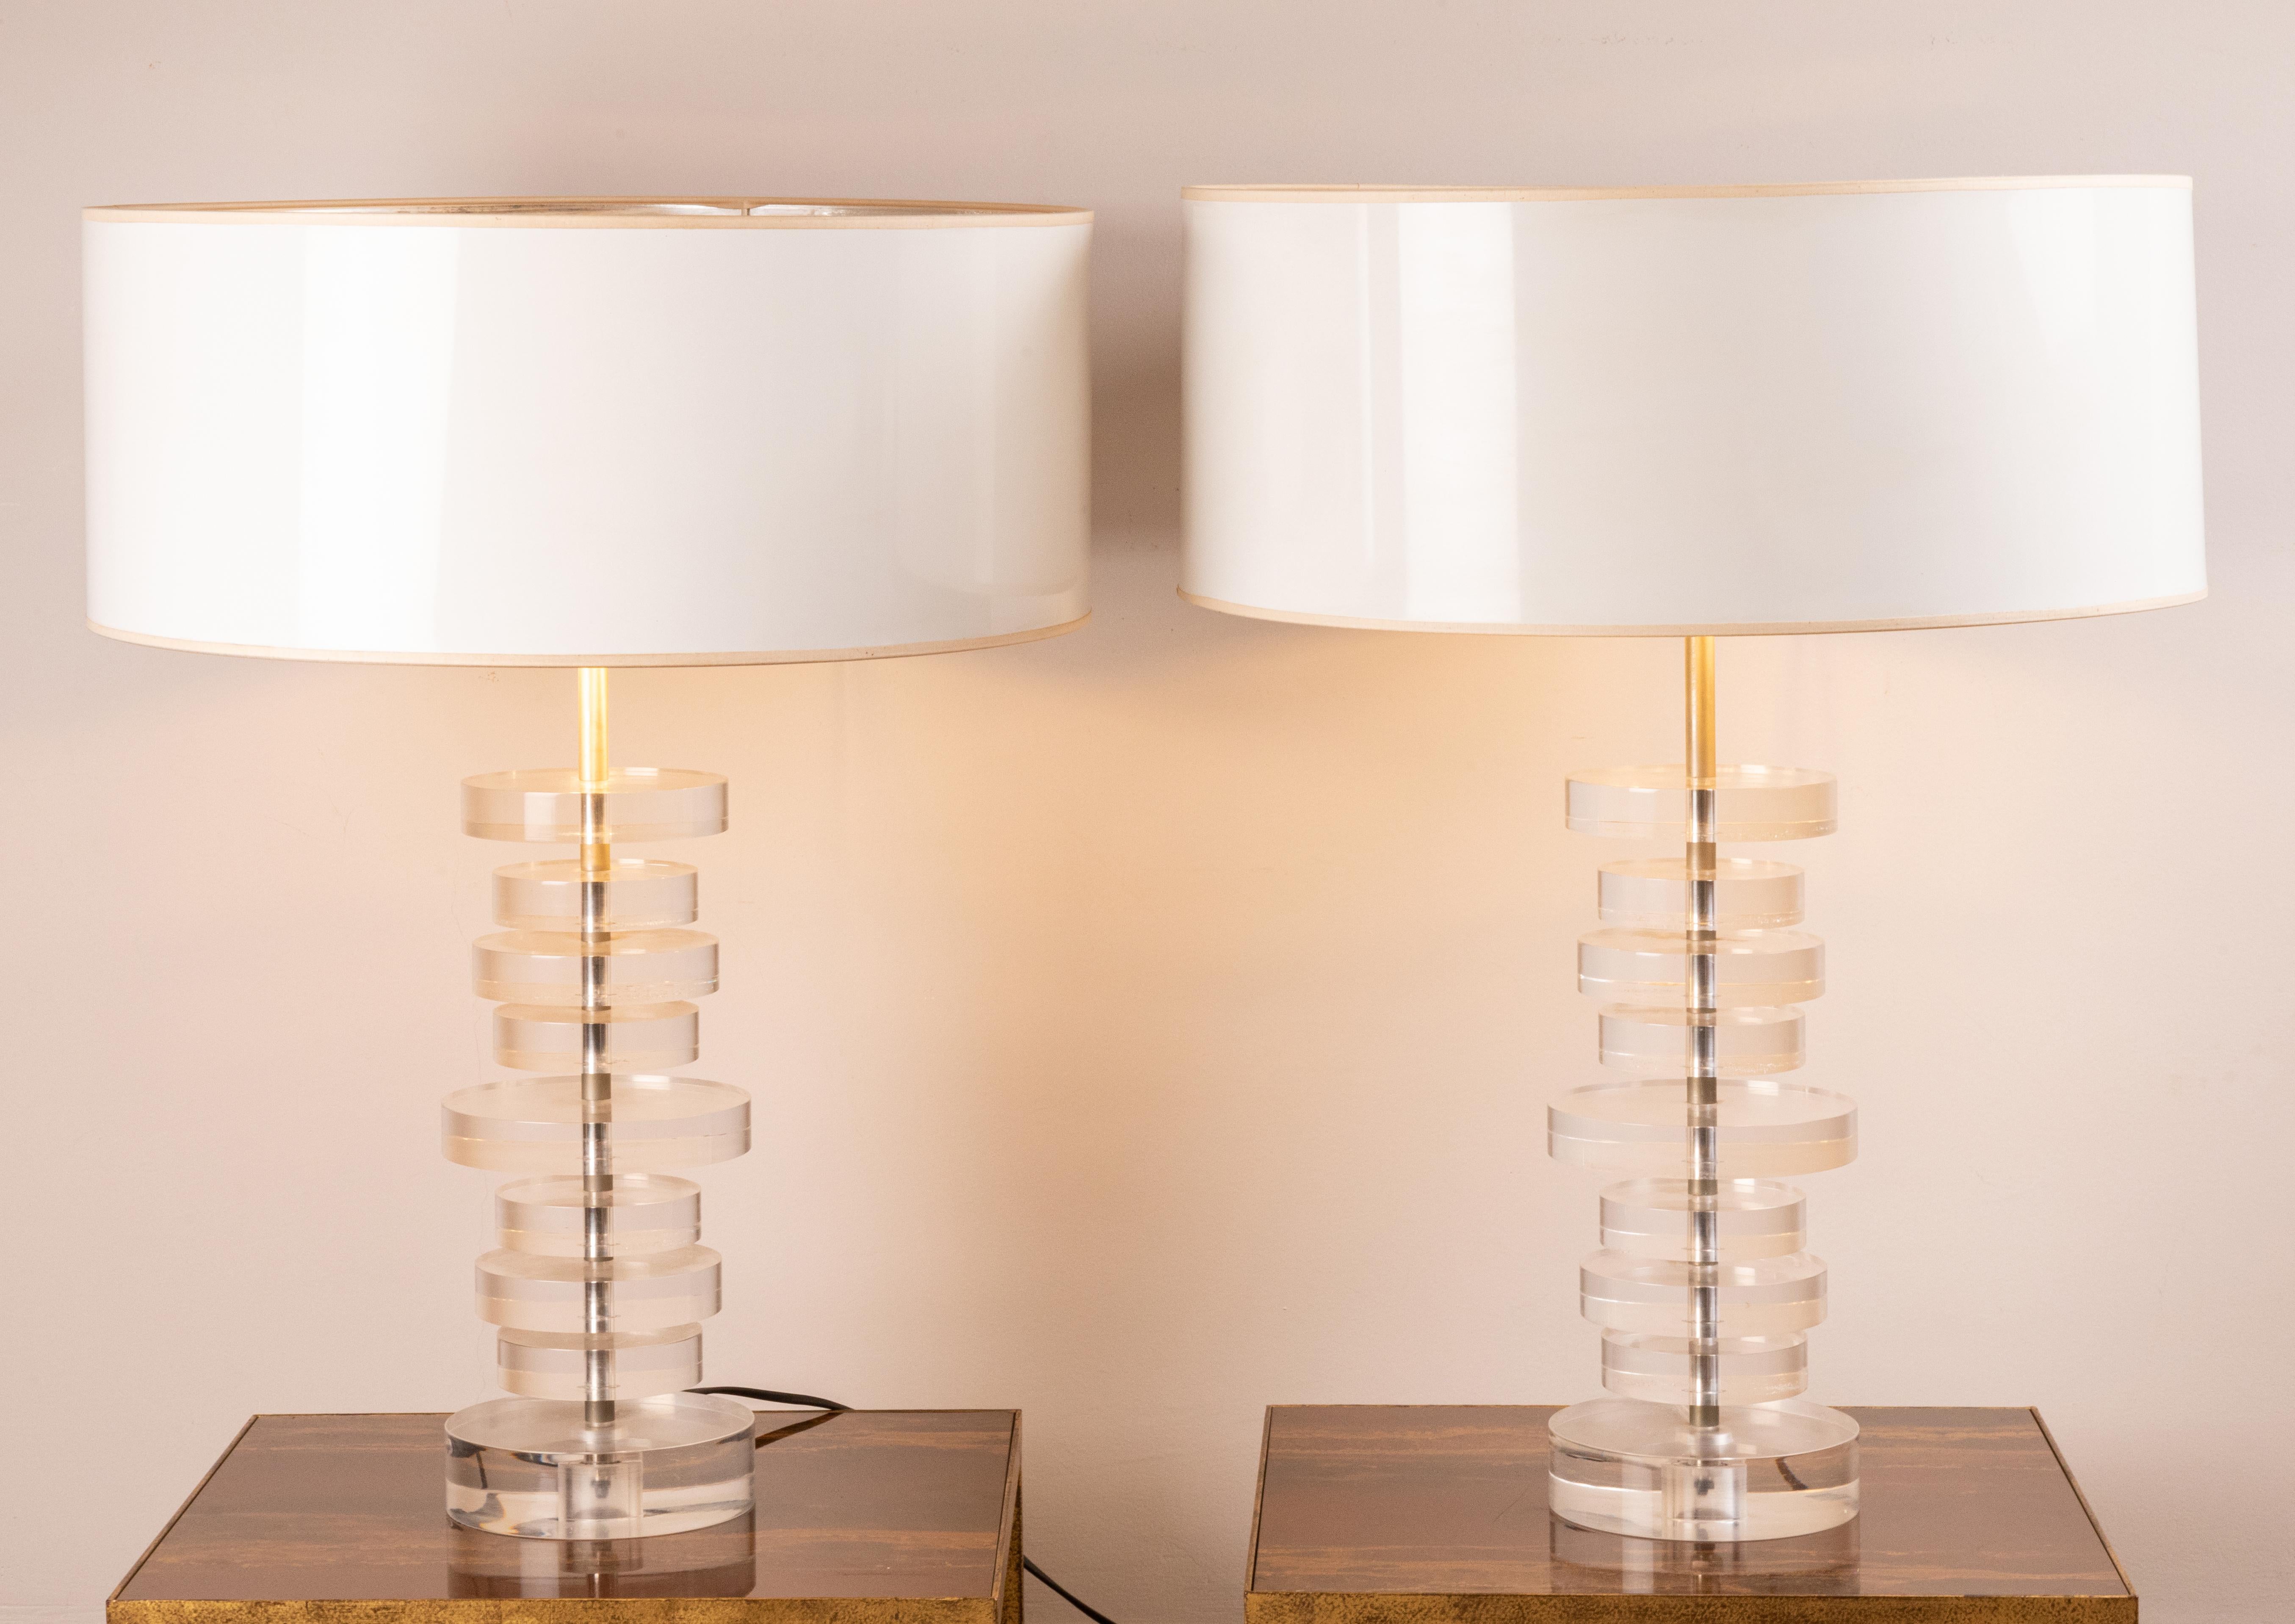 Pair of table lamps,
 Lucite cylinder discs on metal stem.
original shades in excellent vintage condition measures: H total: 64 cm (25.2 inches) 
H plexi lamp: 36 cm (14.2 inches) 
Diameter shade: 48 cm (18.9 inches)
Diameter lamp: 15 cm (5.9